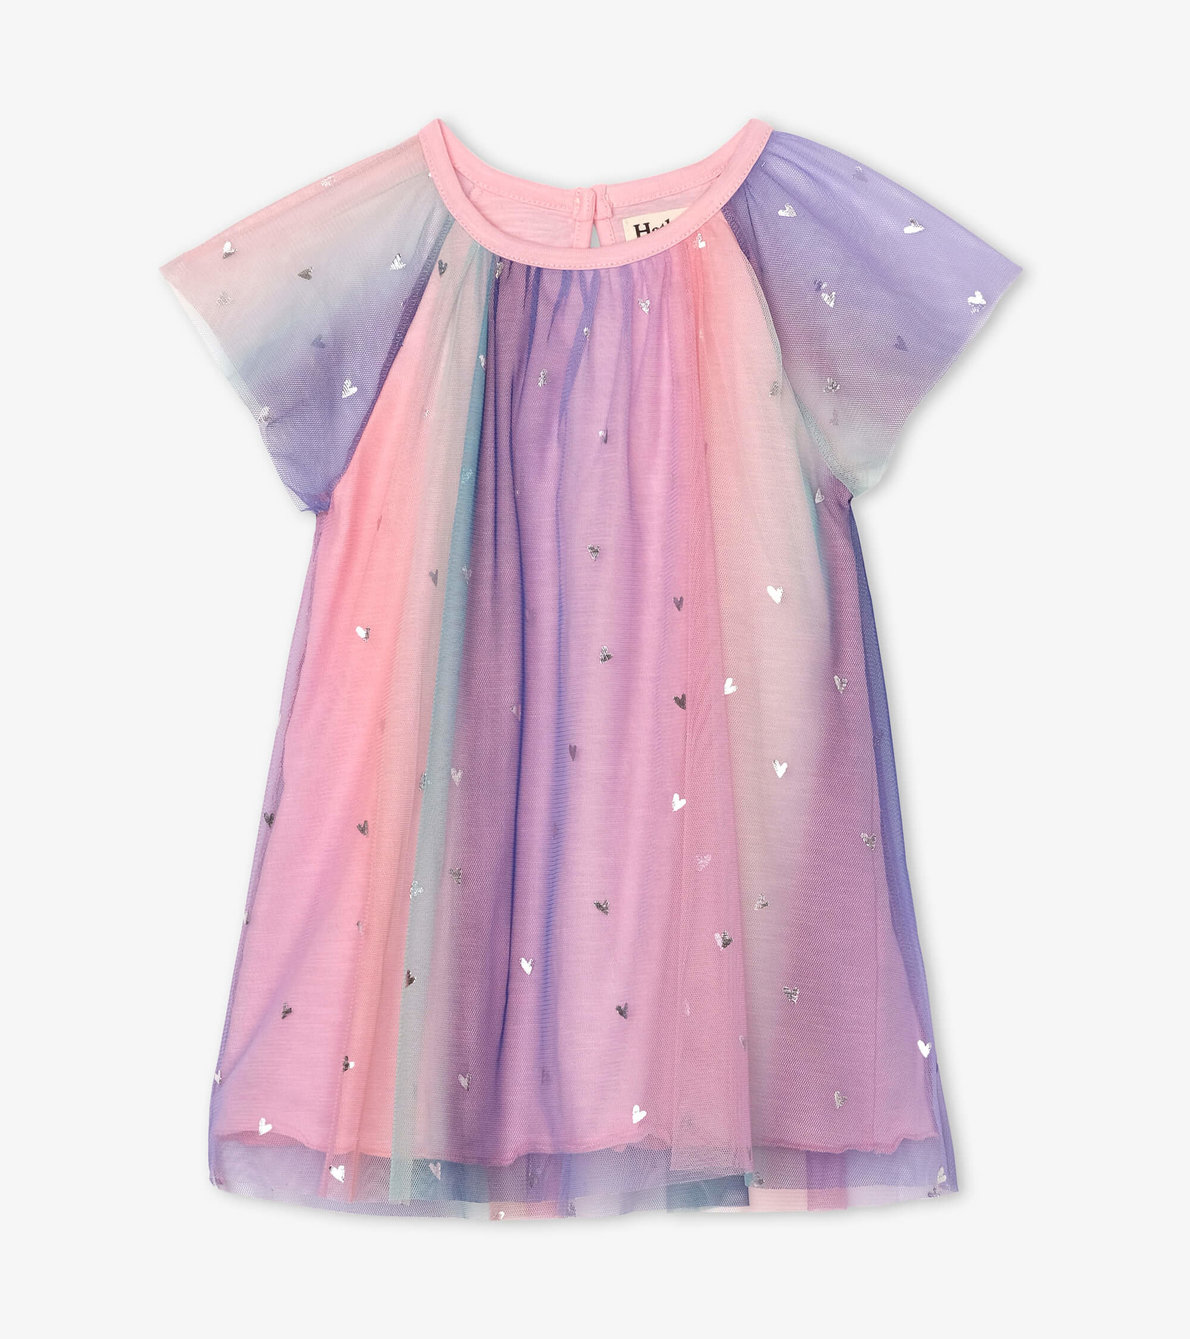 View larger image of Metallic Hearts Baby Rainbow Tulle Dress